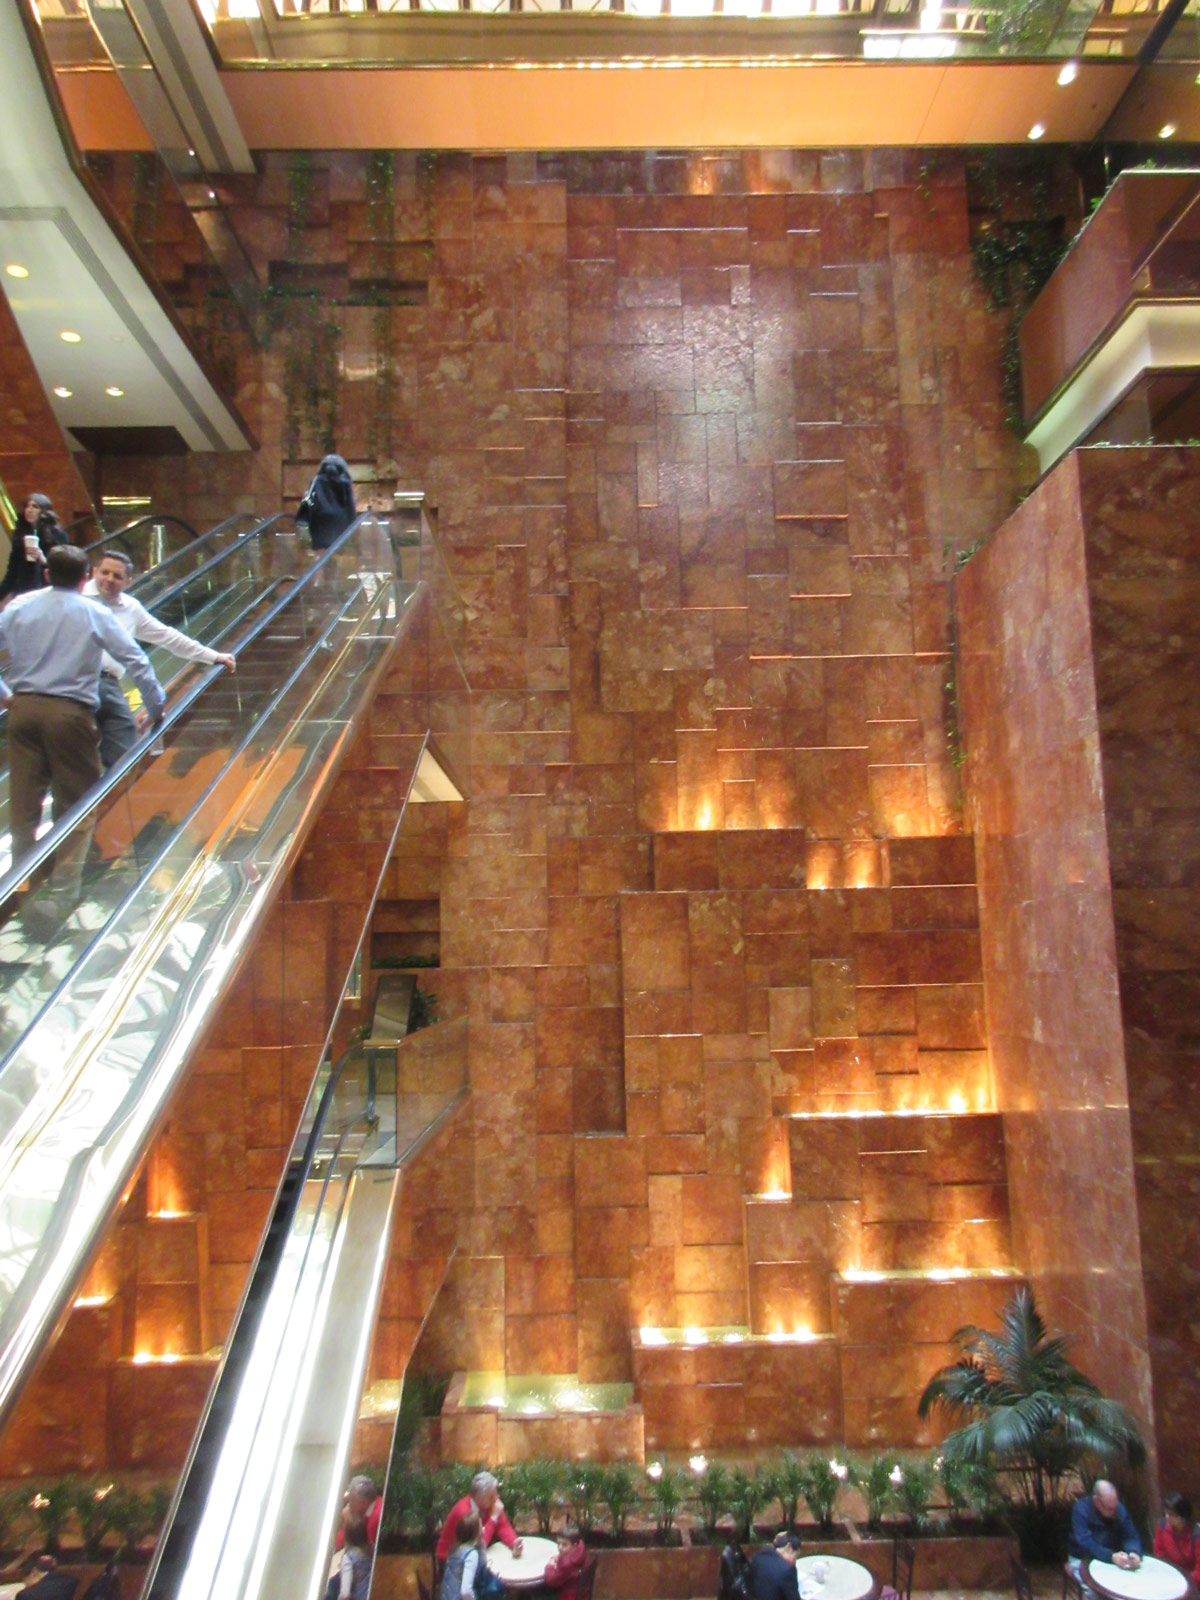 Paul Goldberger once praised the escalator- and waterfall-lined atrium of the Trump Tower. Inside the atrium are several eateries, including the Trump Bar, Trump Grill, Trump Cafe, and Trump’s Ice Cream Parlor. (William Menking)